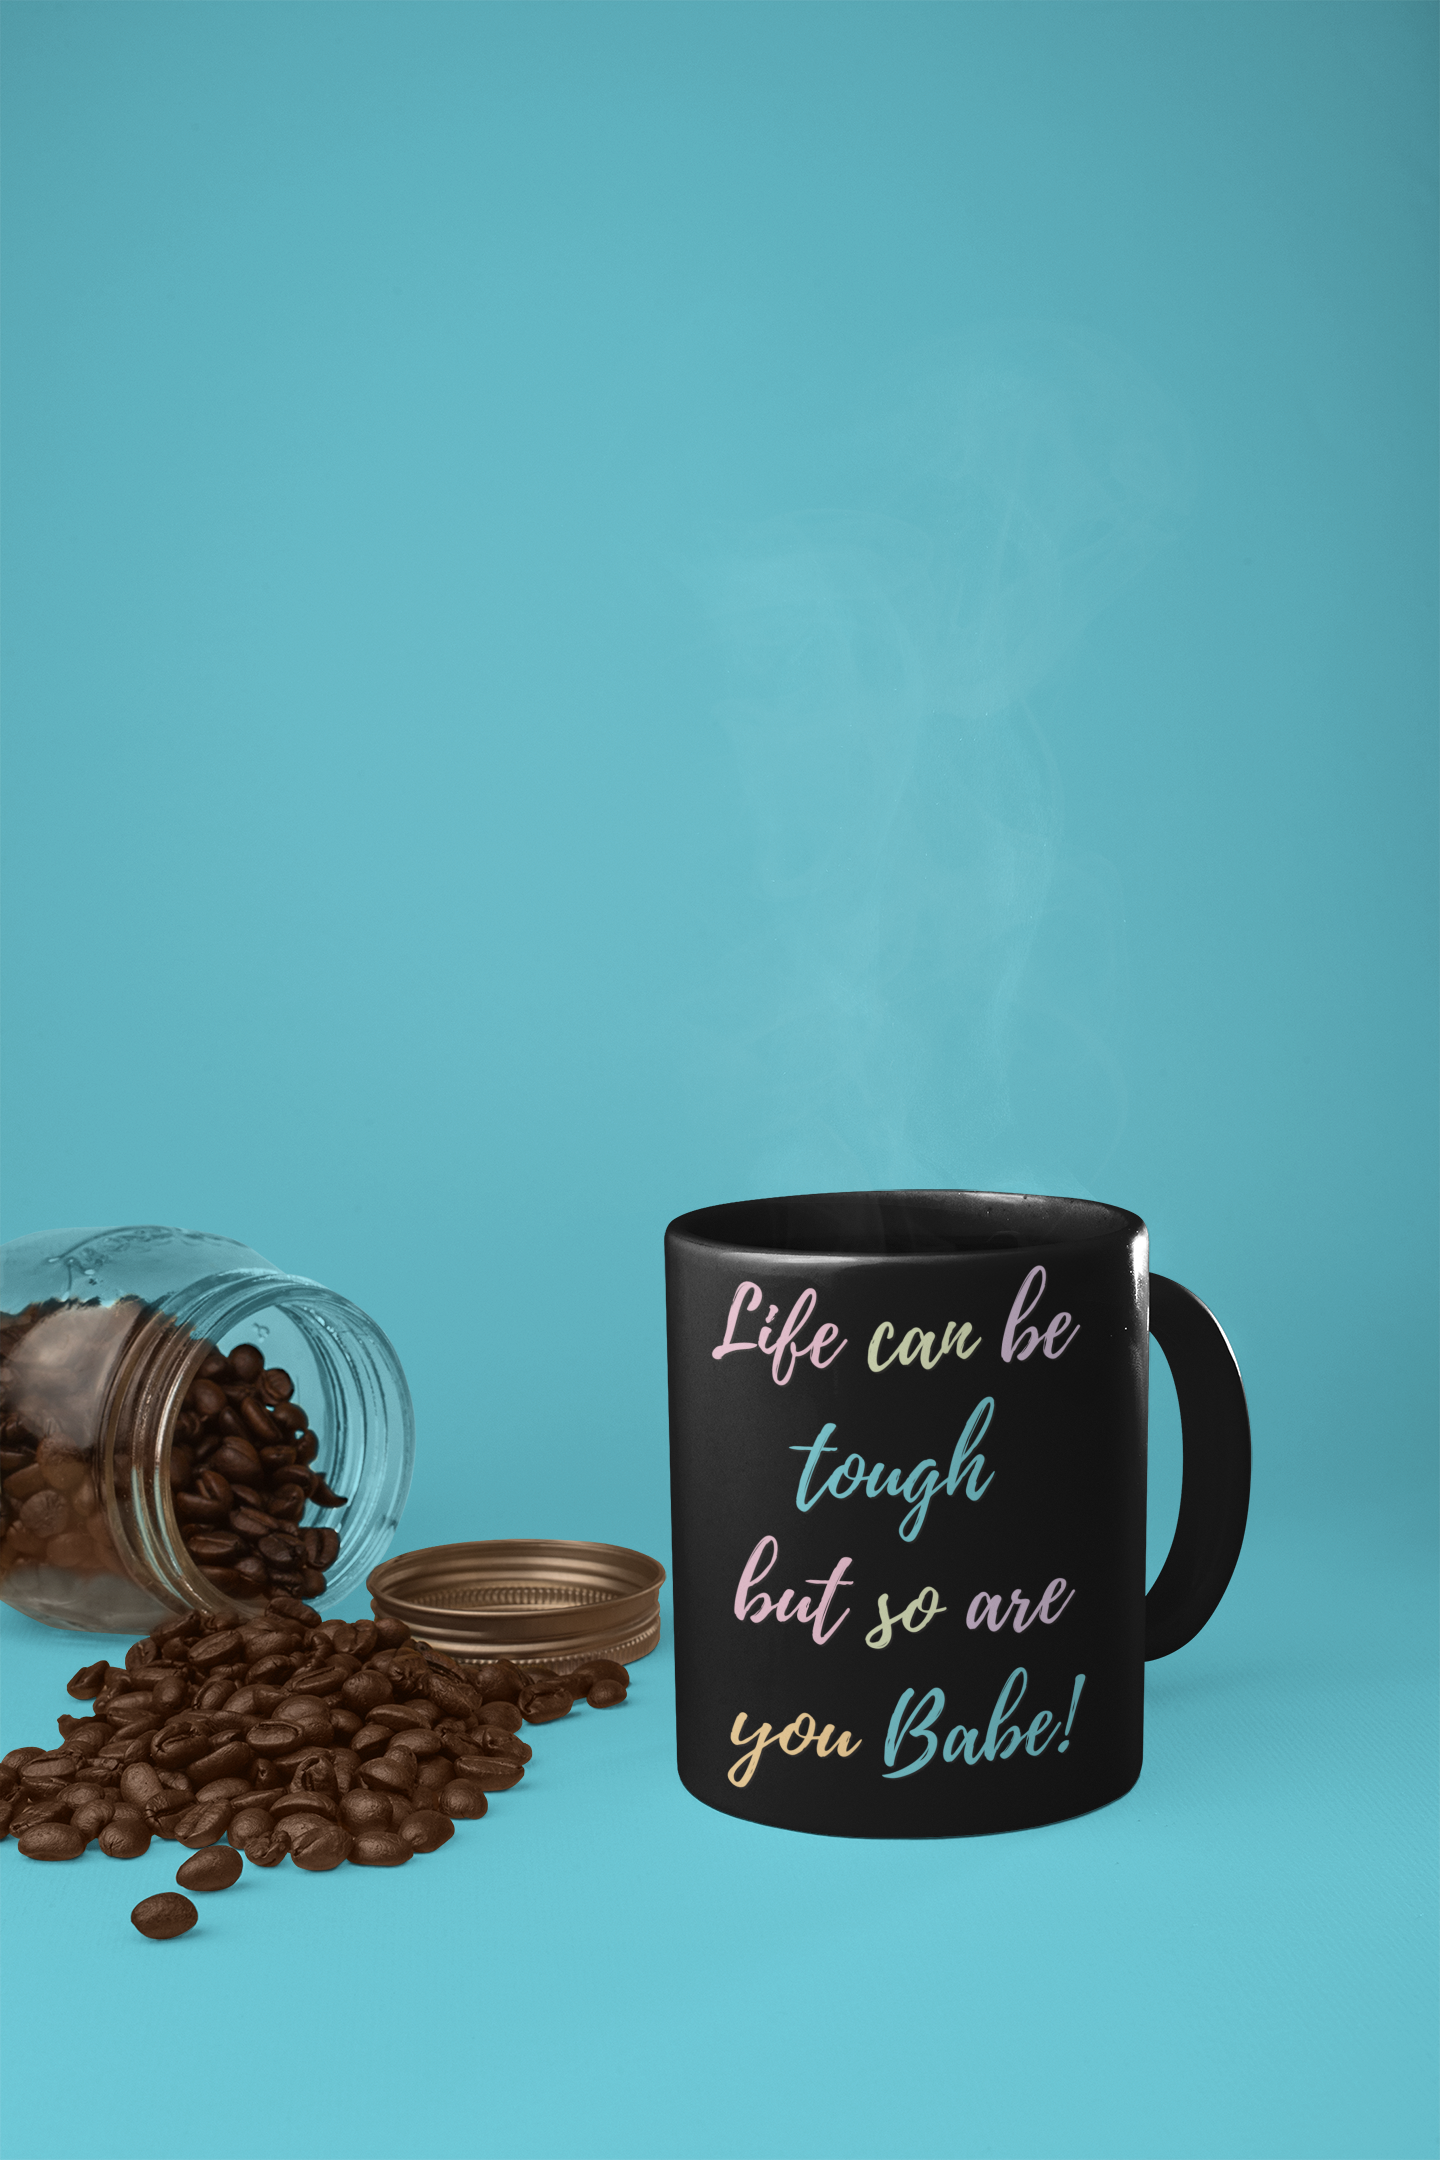 Life Can Be Hard but so are You Mug 11oz